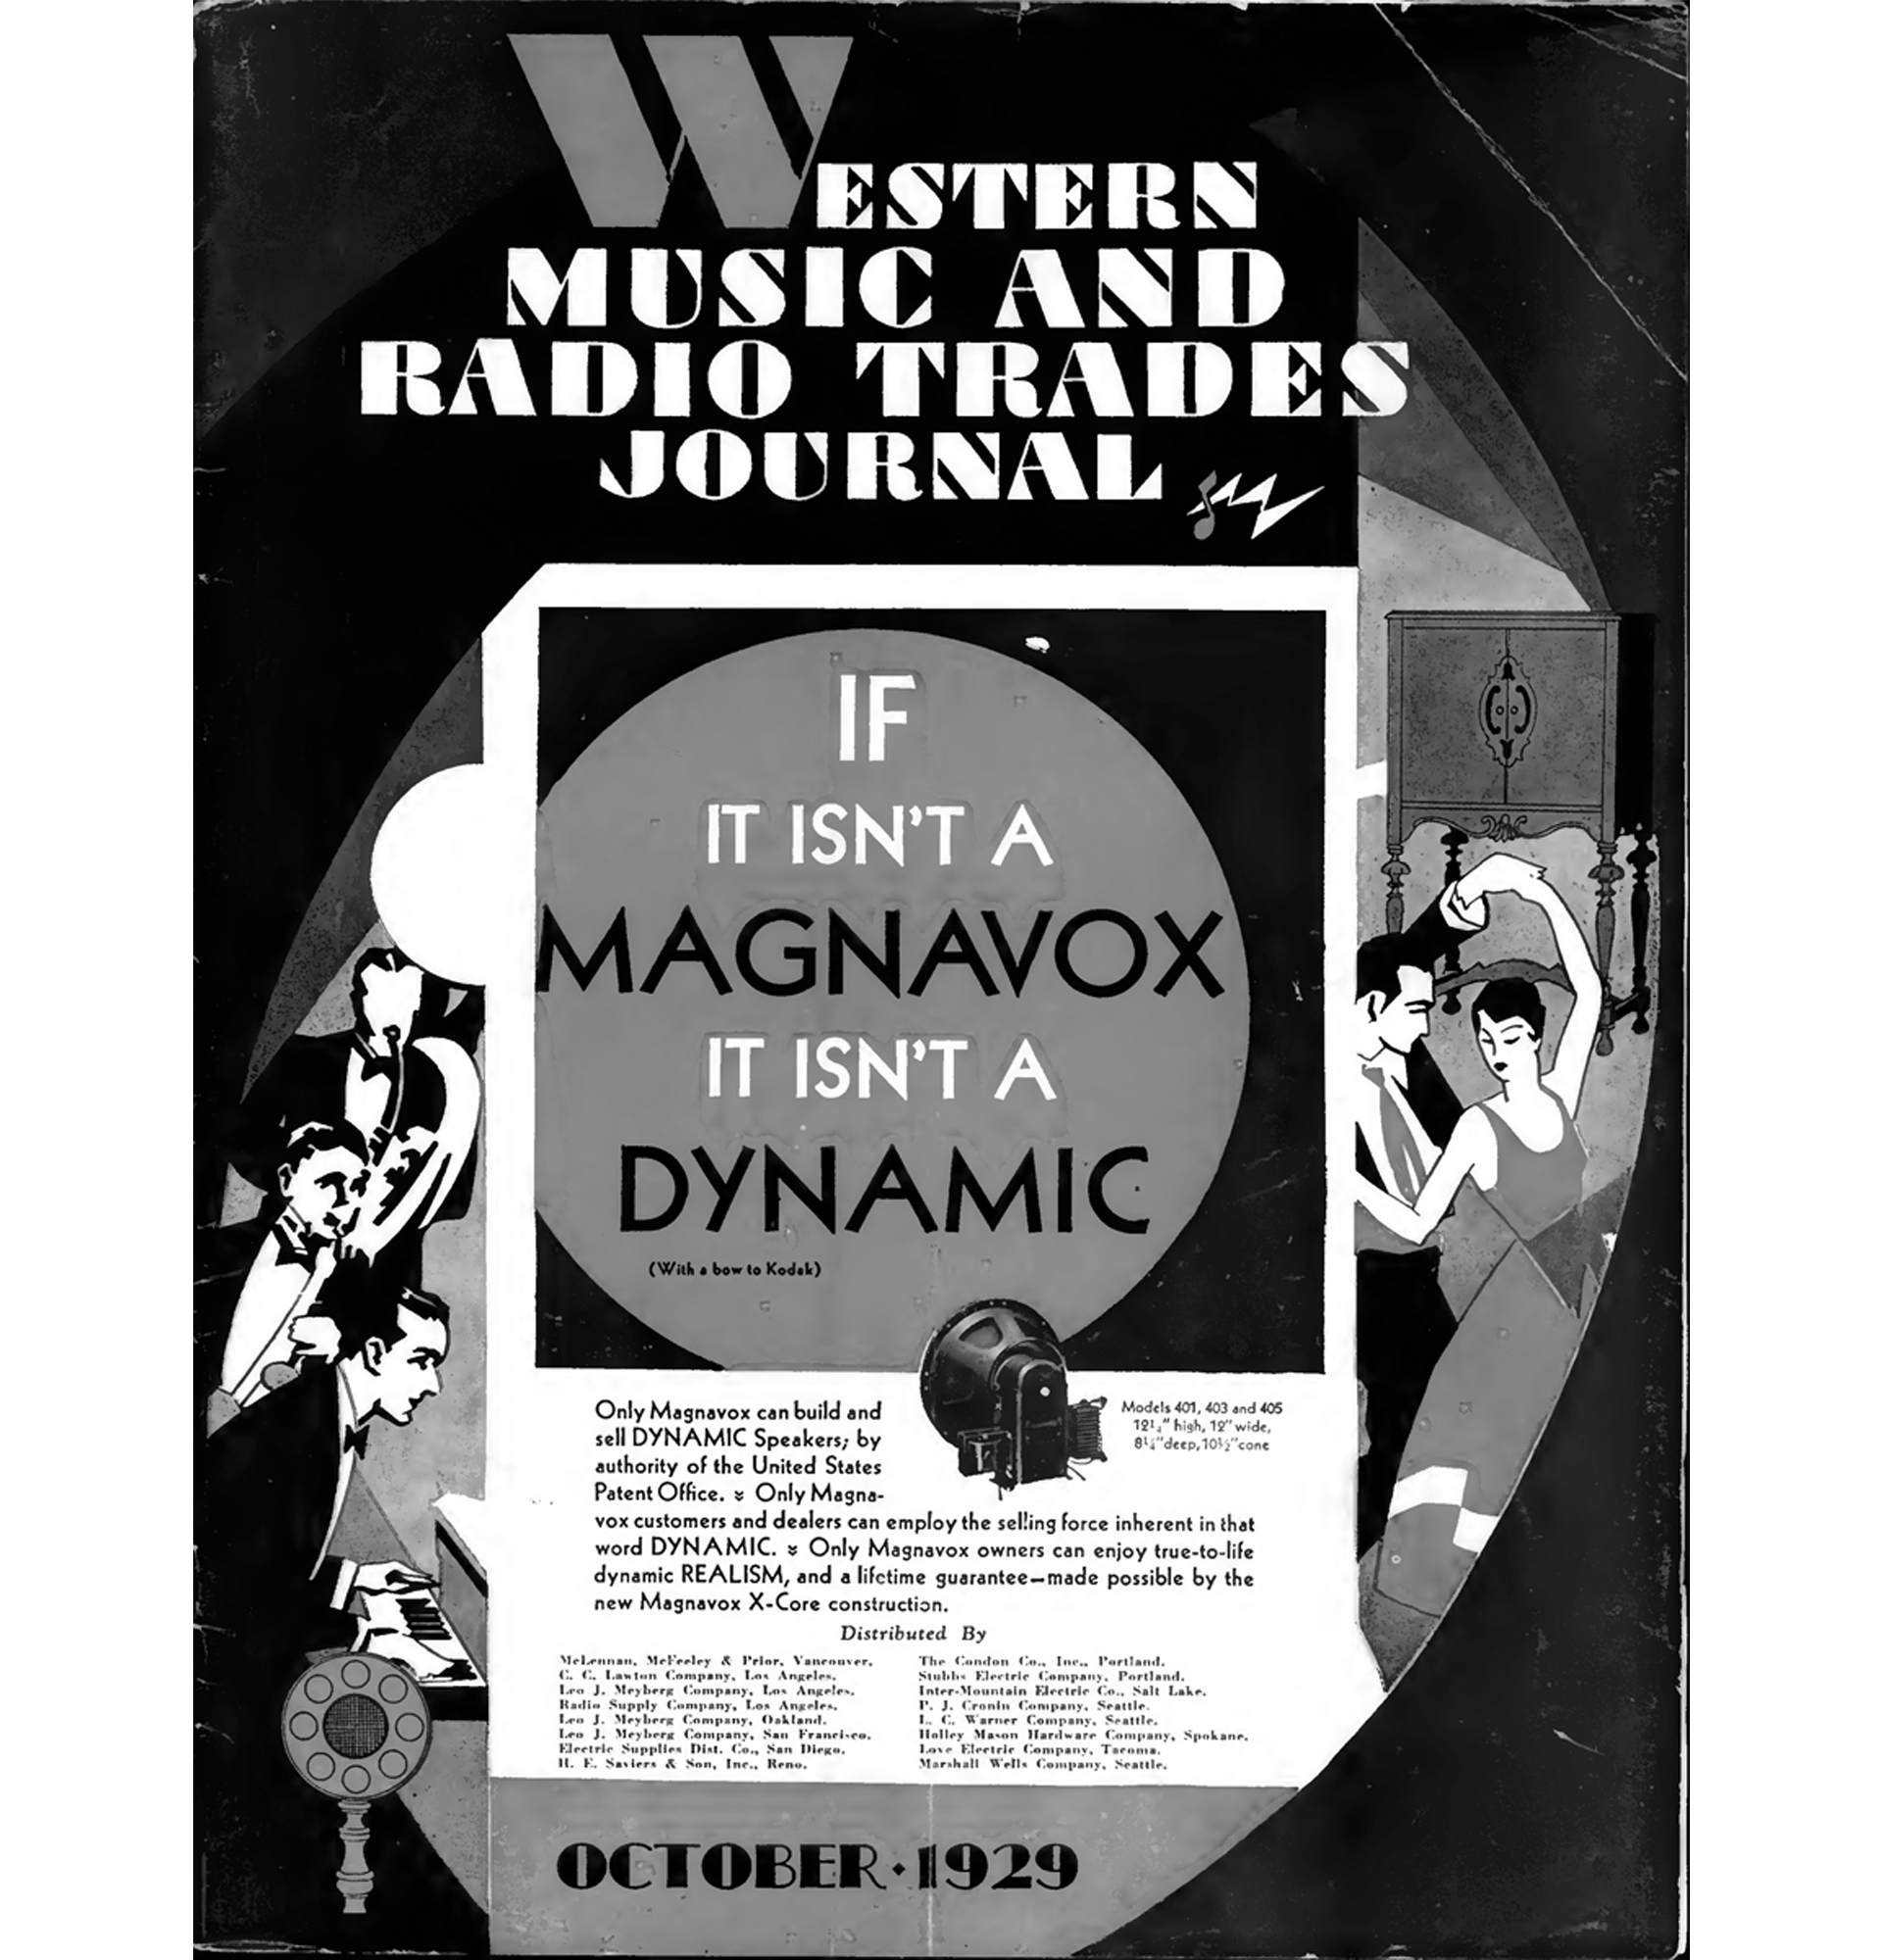 An old Western Music and Radio Trades Journal